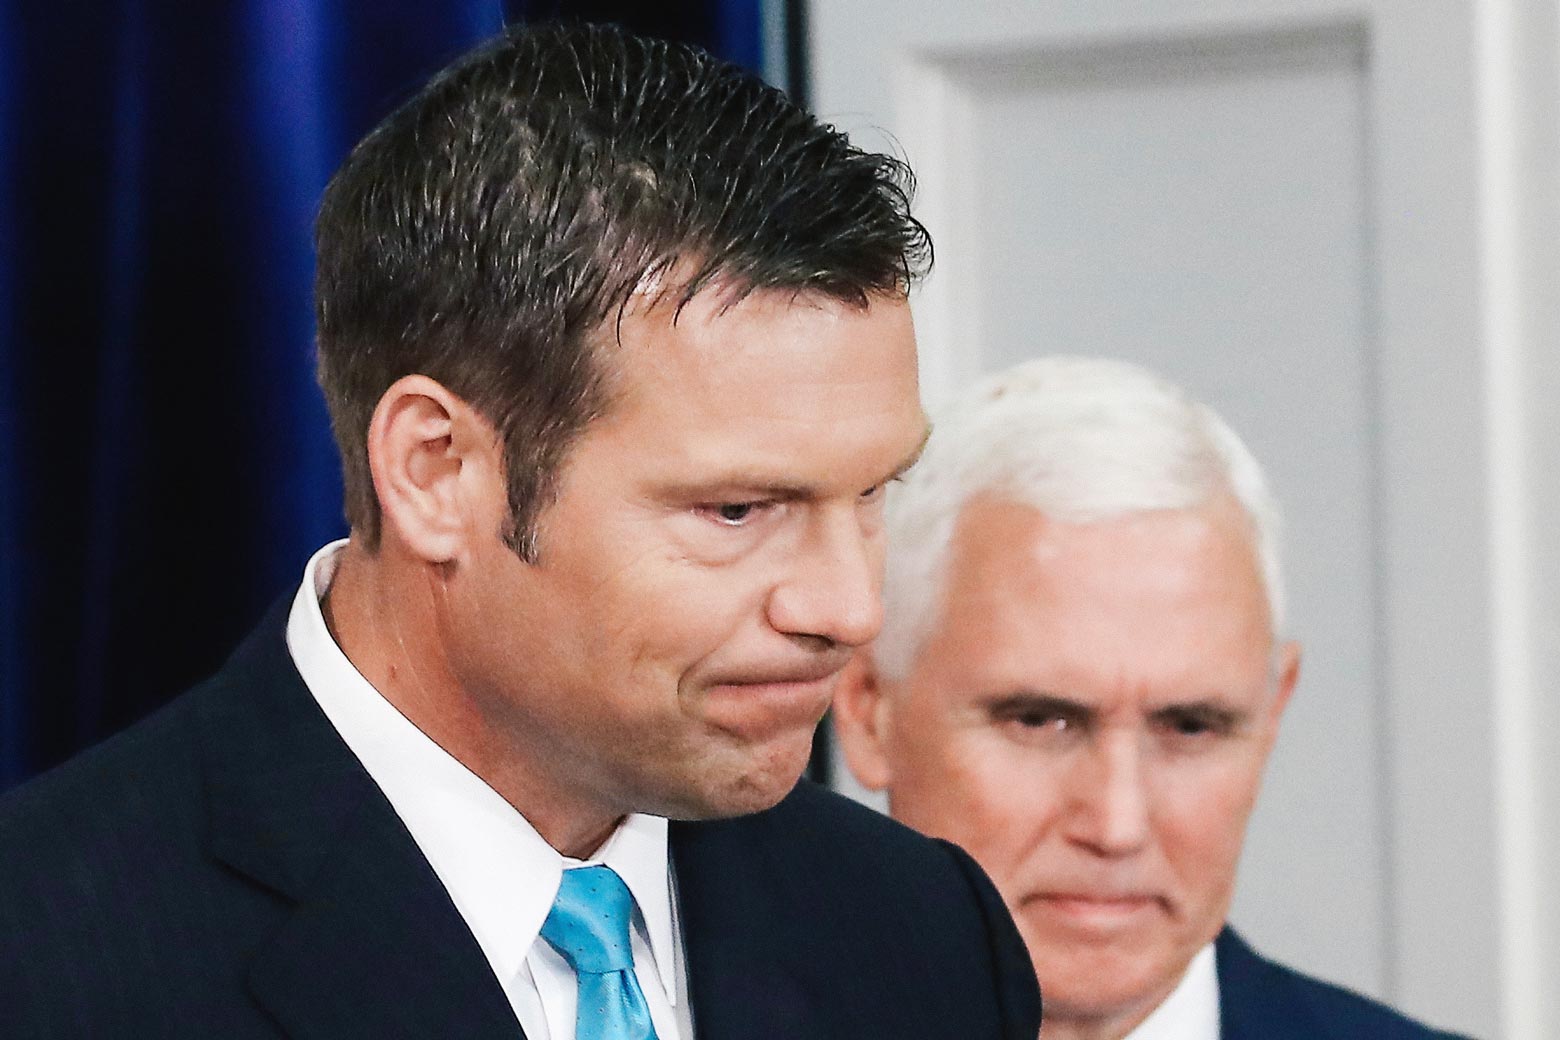 Kansas Secretary of State, Kris Kobach (L) and US Vice President Mike Pence, attend the first meeting of the Presidential Advisory Commission on Election Integrity in the Eisenhower Executive Office Building, on July 19, 2017 in Washington, DC.